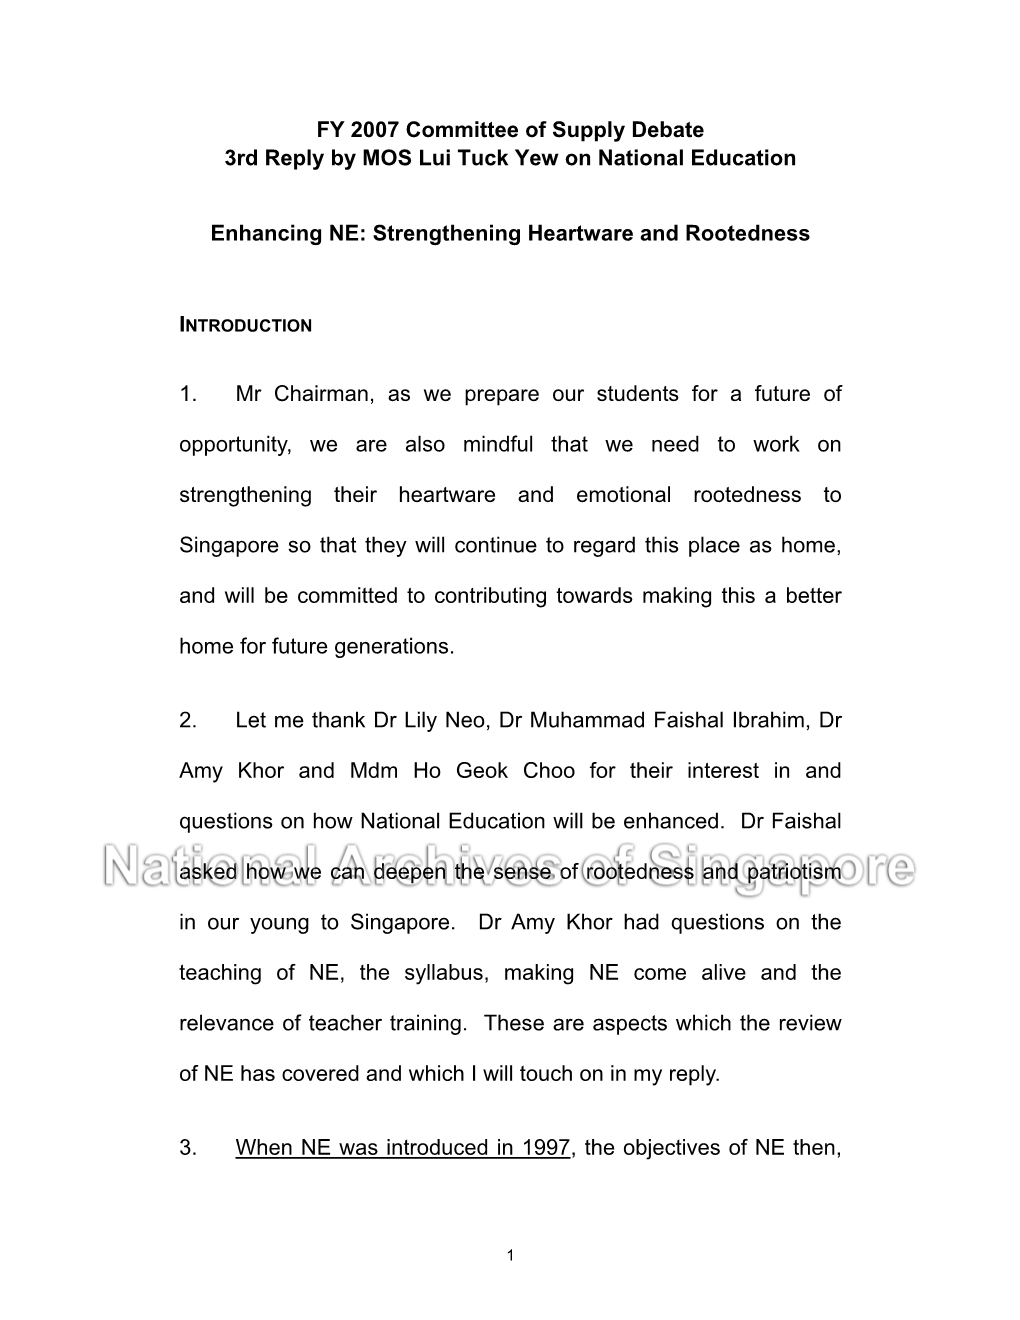 FY 2007 Committee of Supply Debate 3Rd Reply by MOS Lui Tuck Yew on National Education